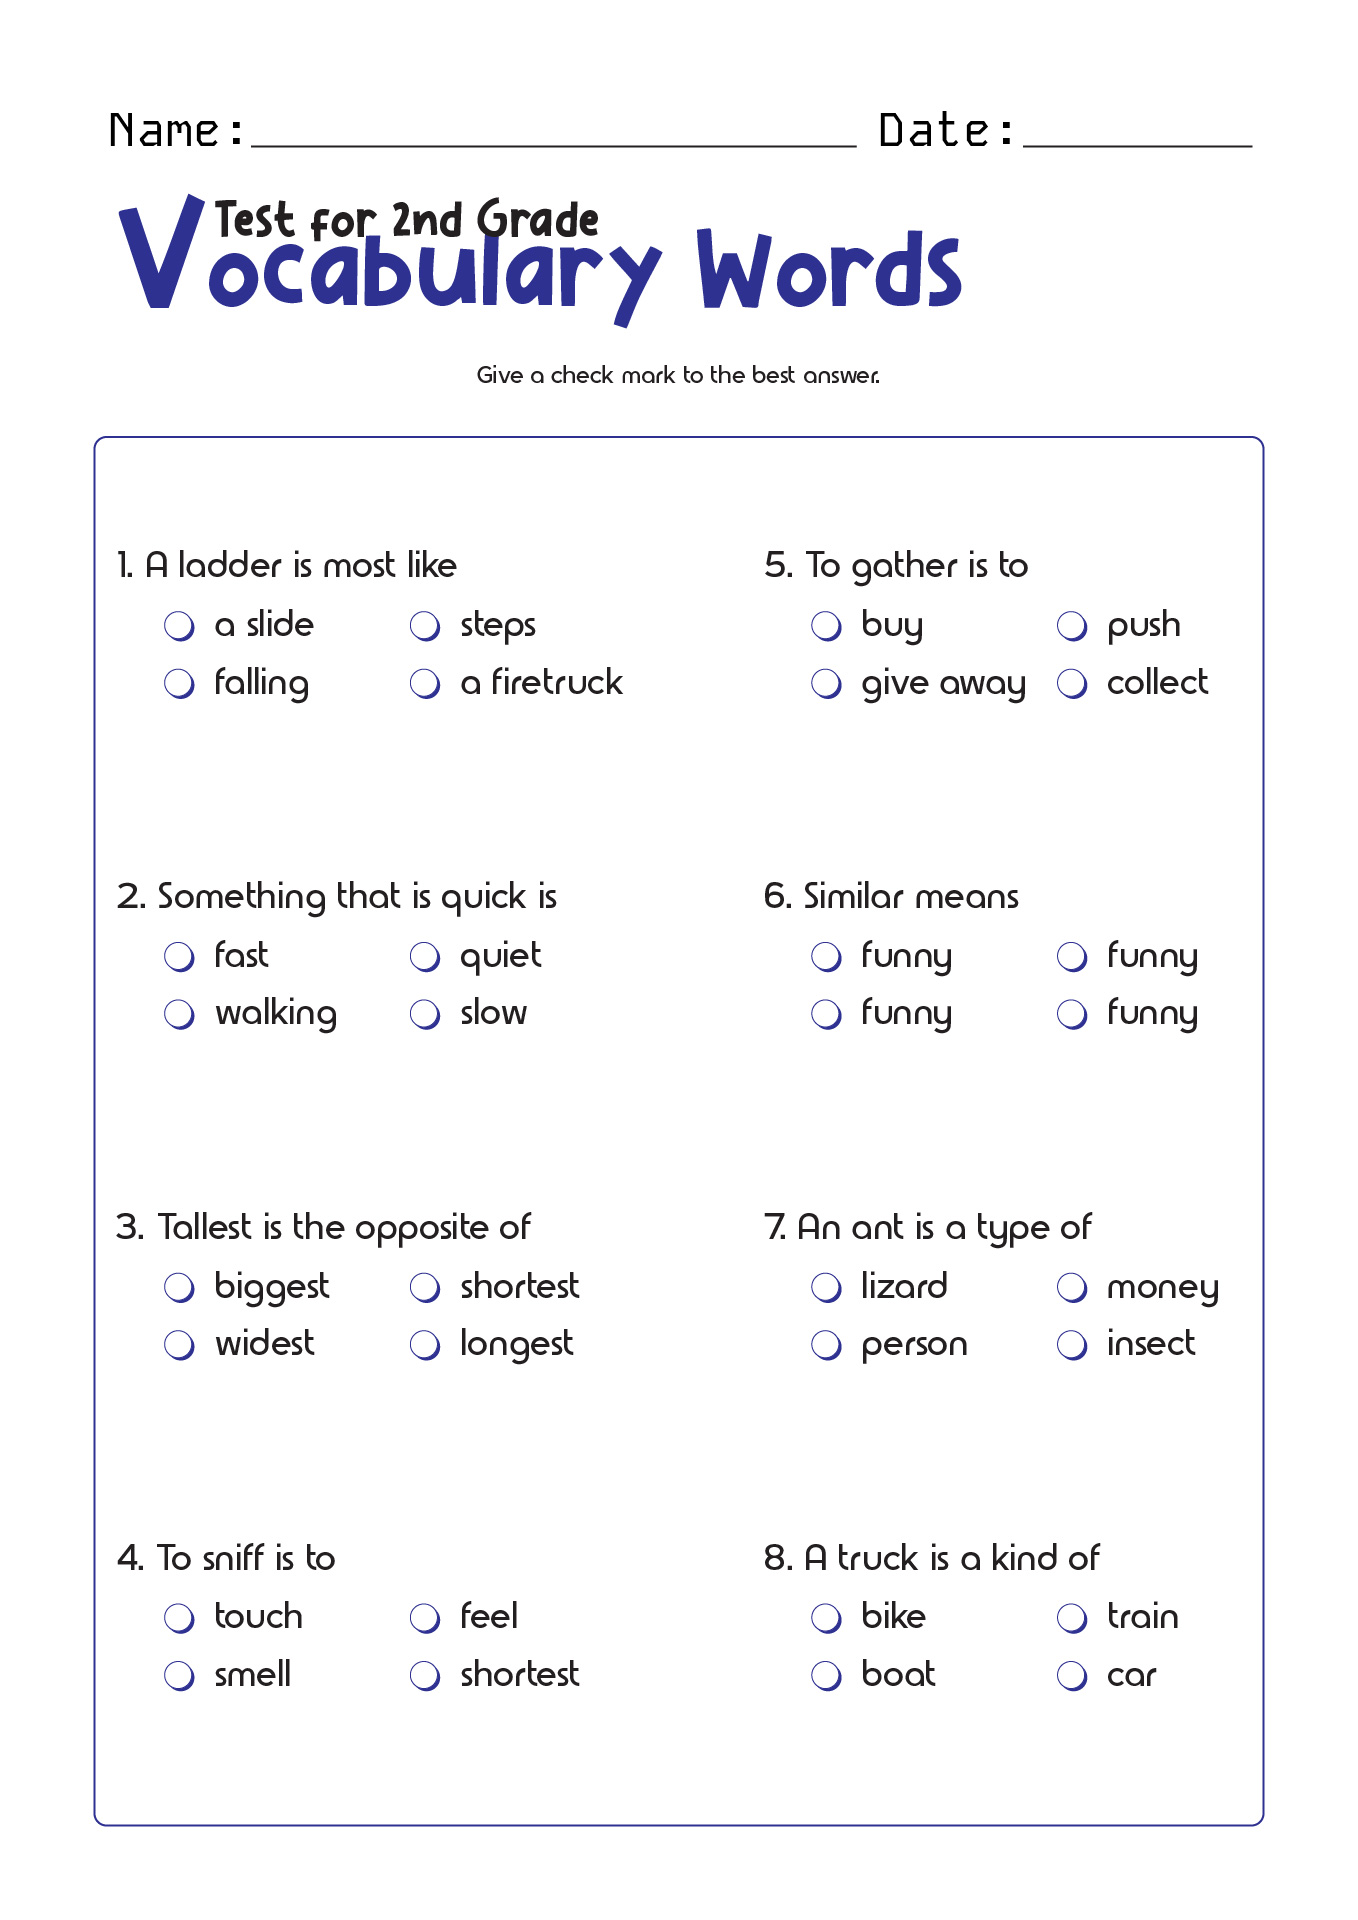 Test for 2nd Grade Vocabulary Words